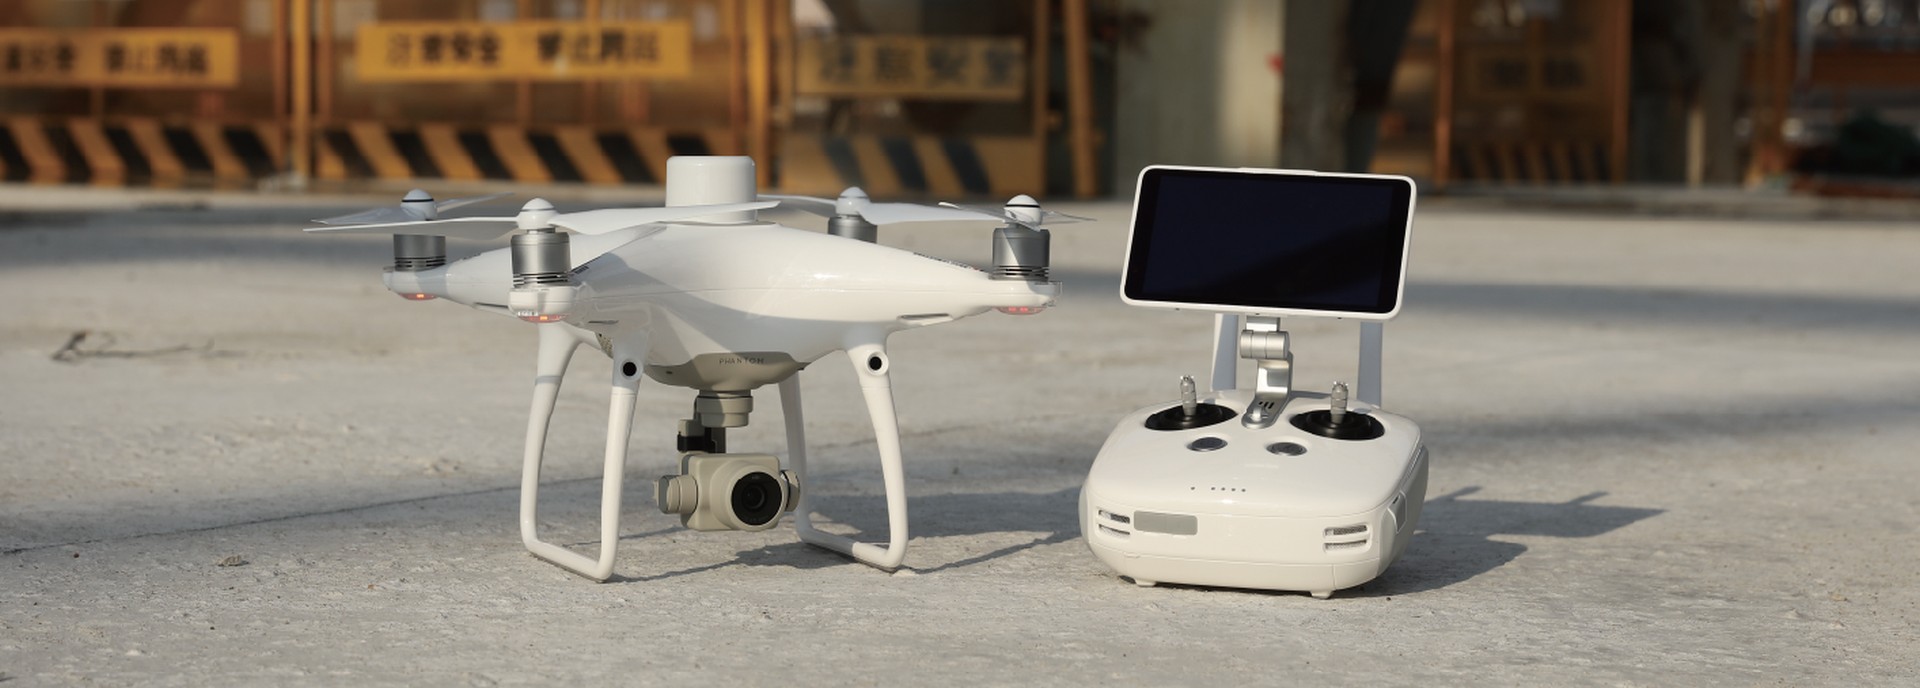 User manuals - DRONEHRP - DJI Agricultural Drone Solutions From Europe's Only Platform